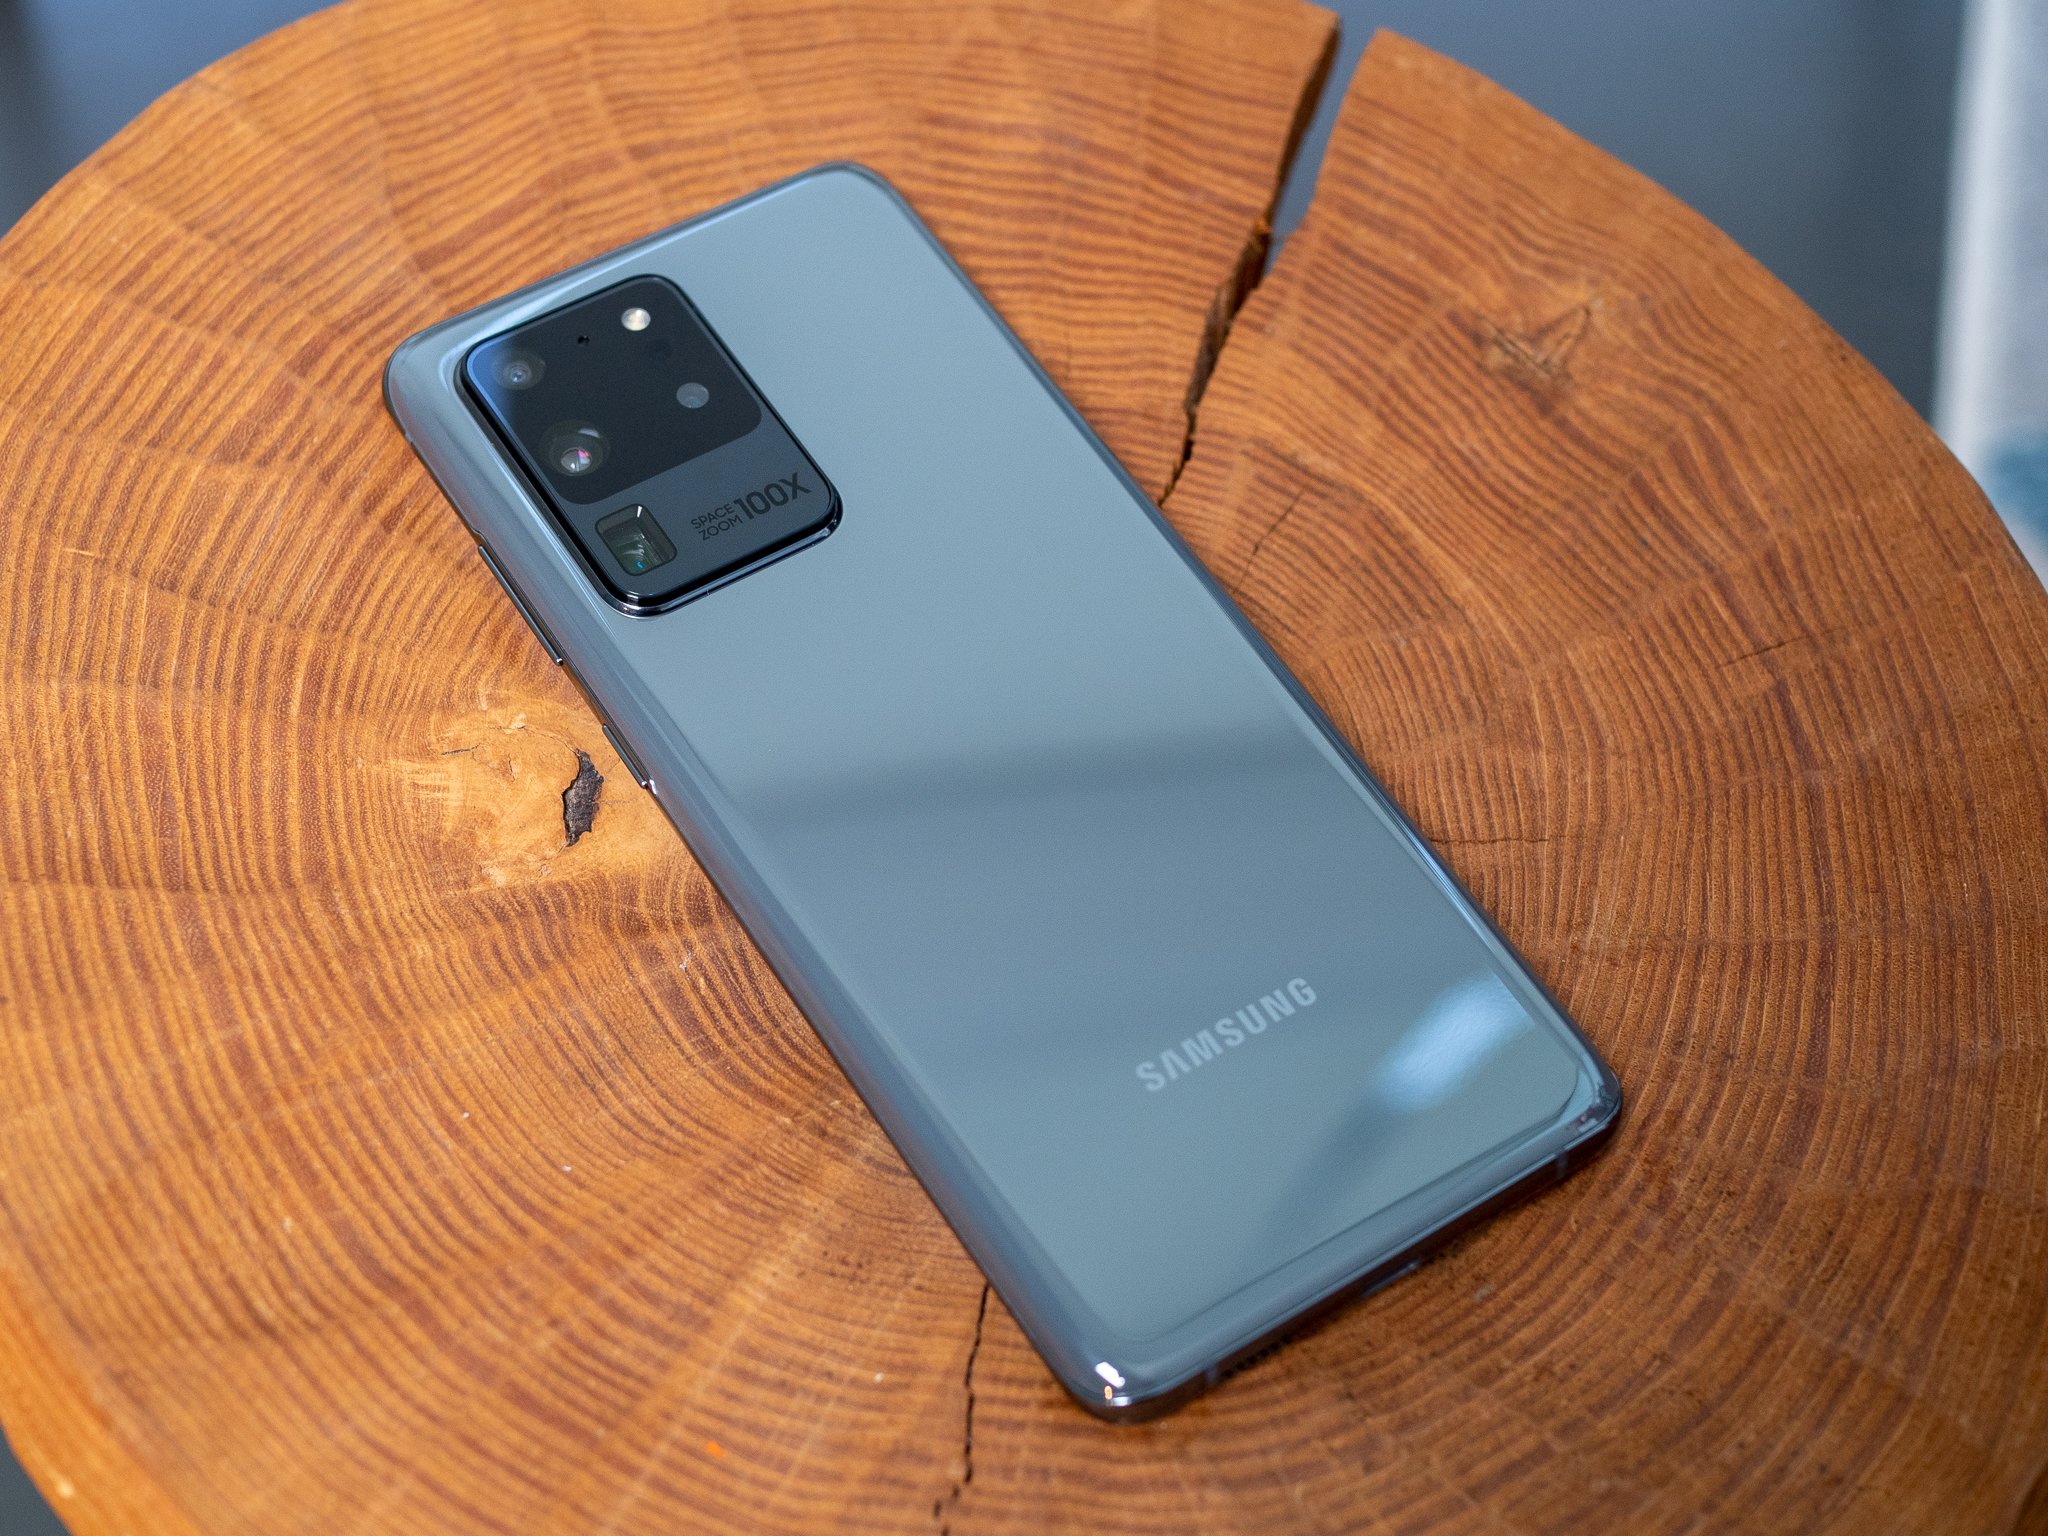 Samsung S Galaxy S20 Phones Have A 5 Minute Recording Limit For 8k